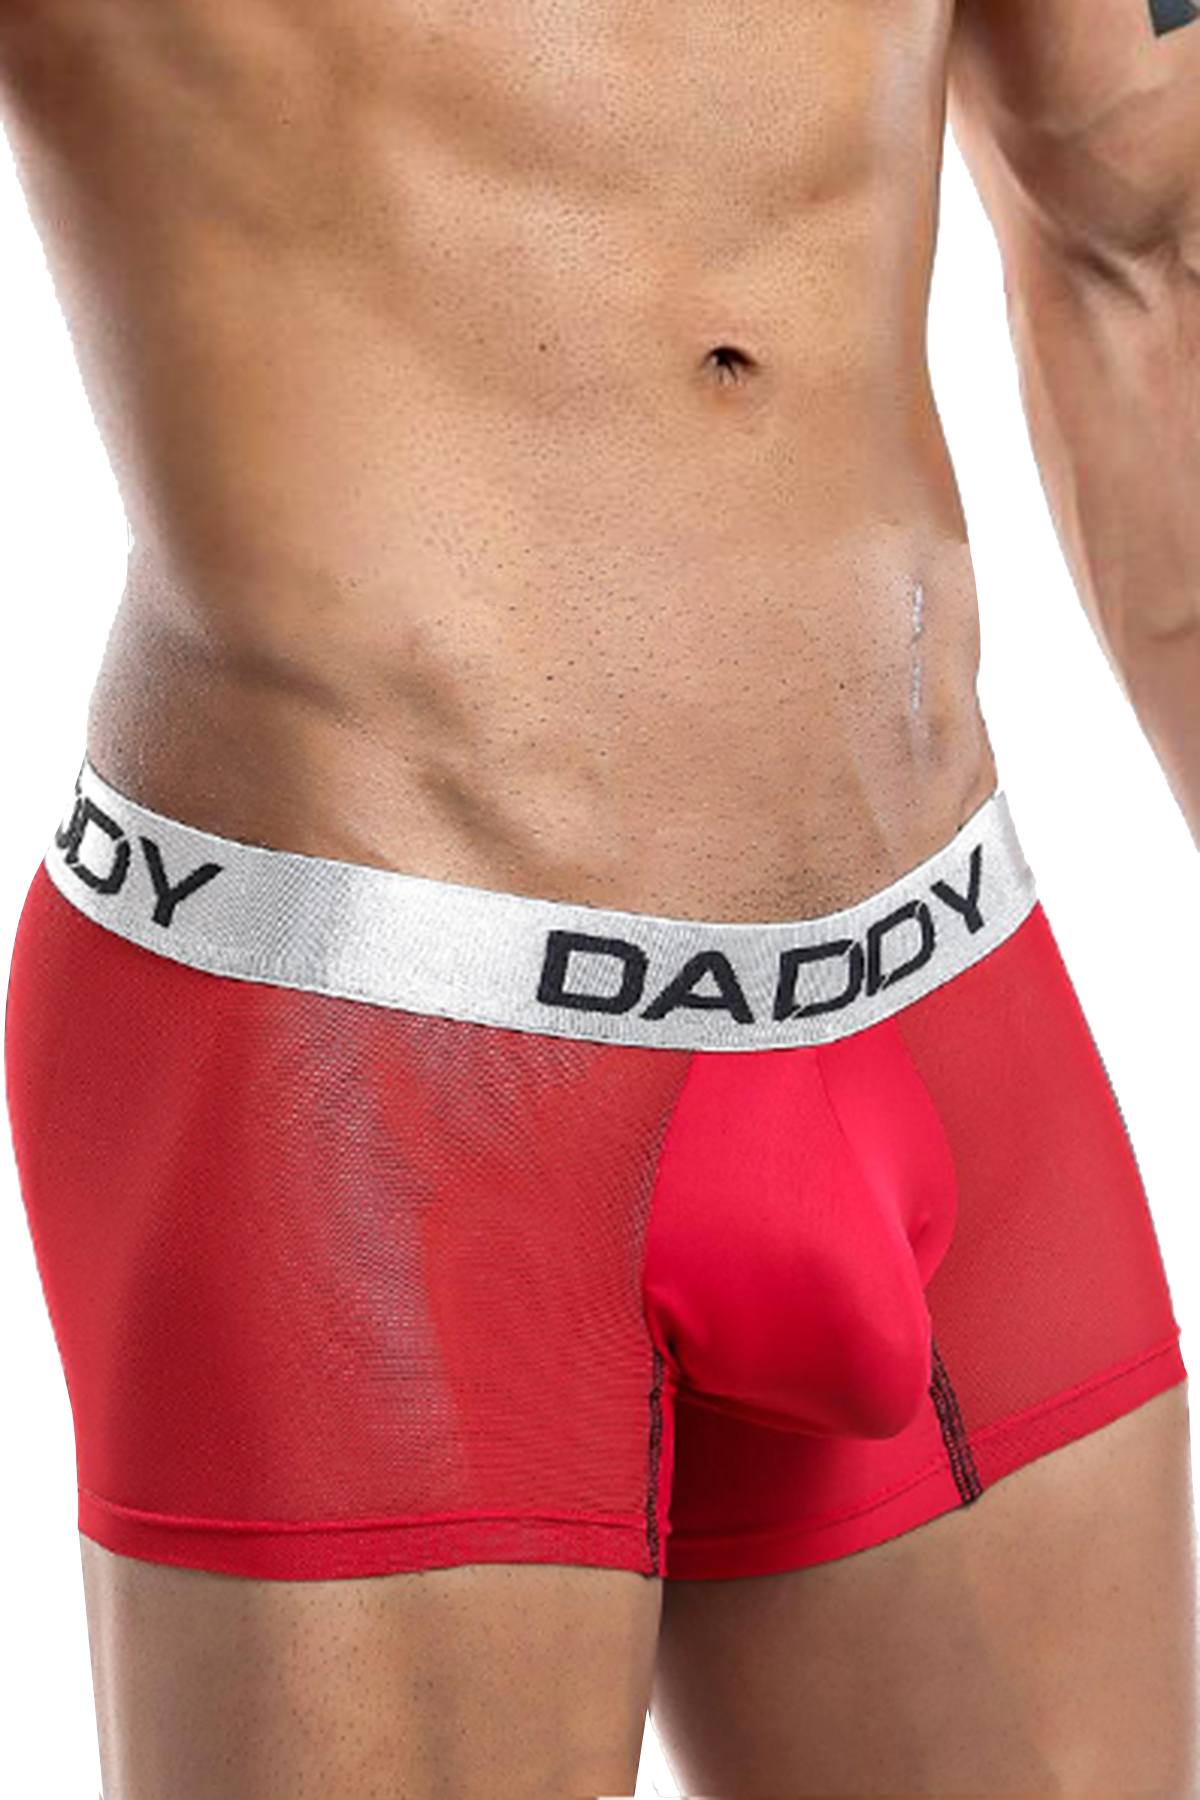 Daddy Sheer Mesh Boxer Trunk in Red